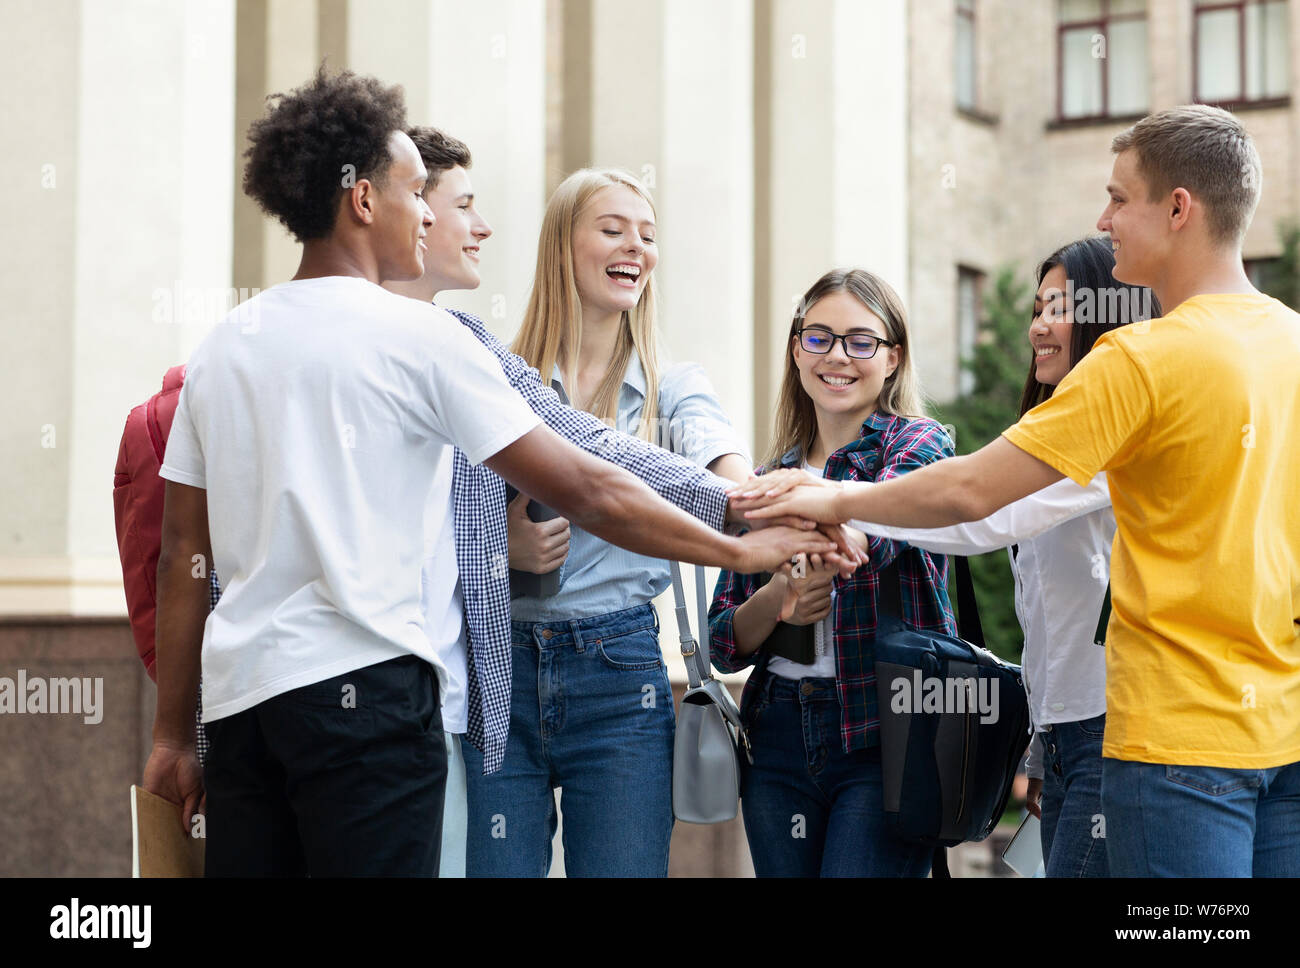 Ready to pass exams. Students stacking hands together Stock Photo